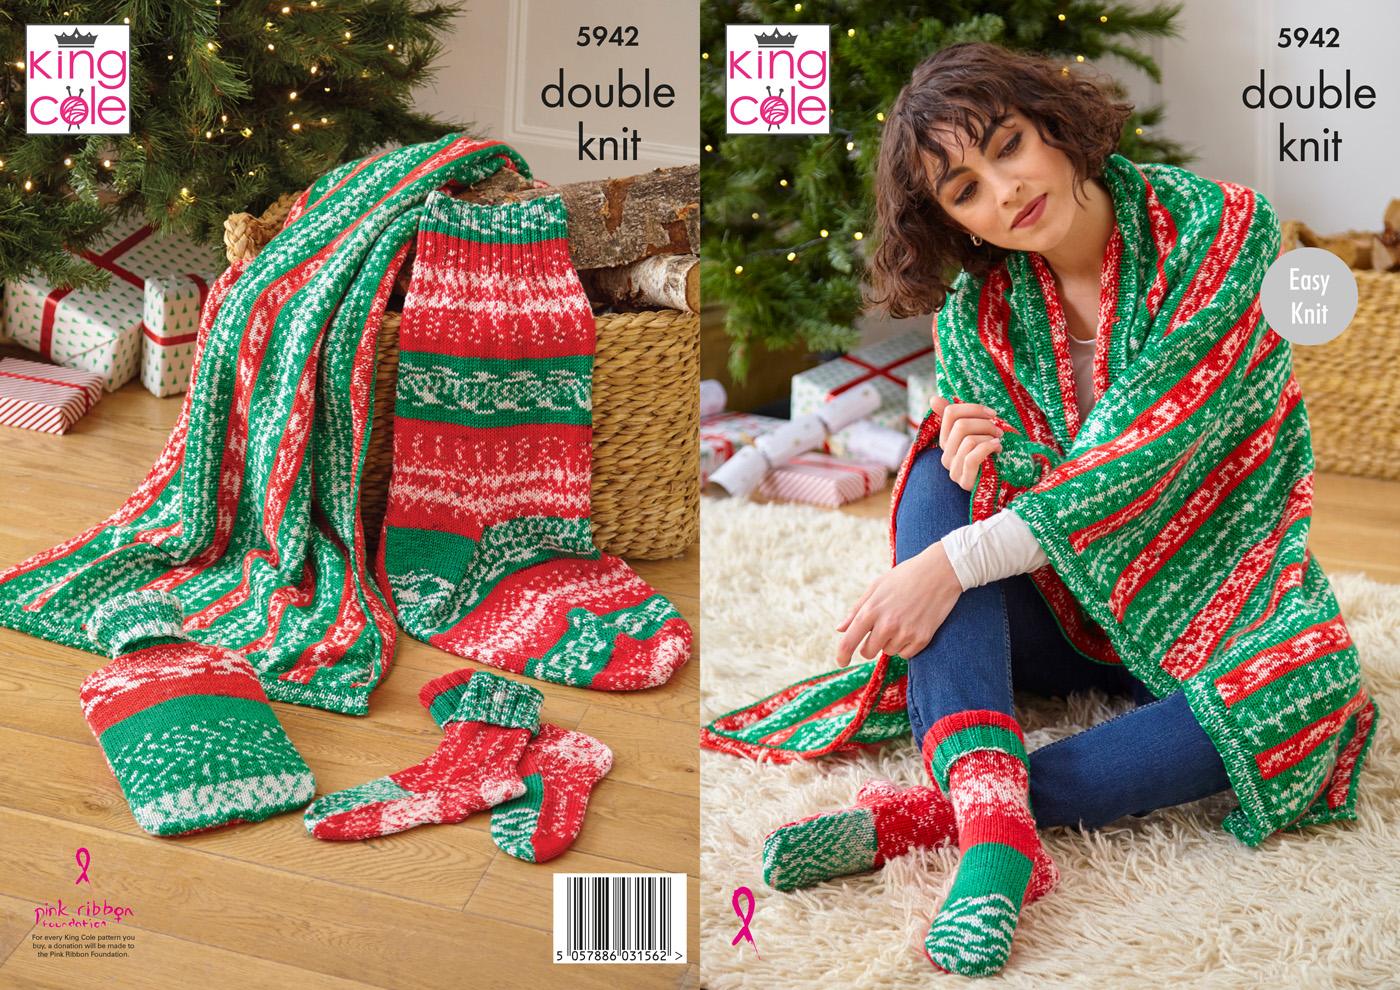 Blanket, Socks, Stocking and Hot Water Bottle Cover: Knitted in King Cole Fjord DK Festive 5942